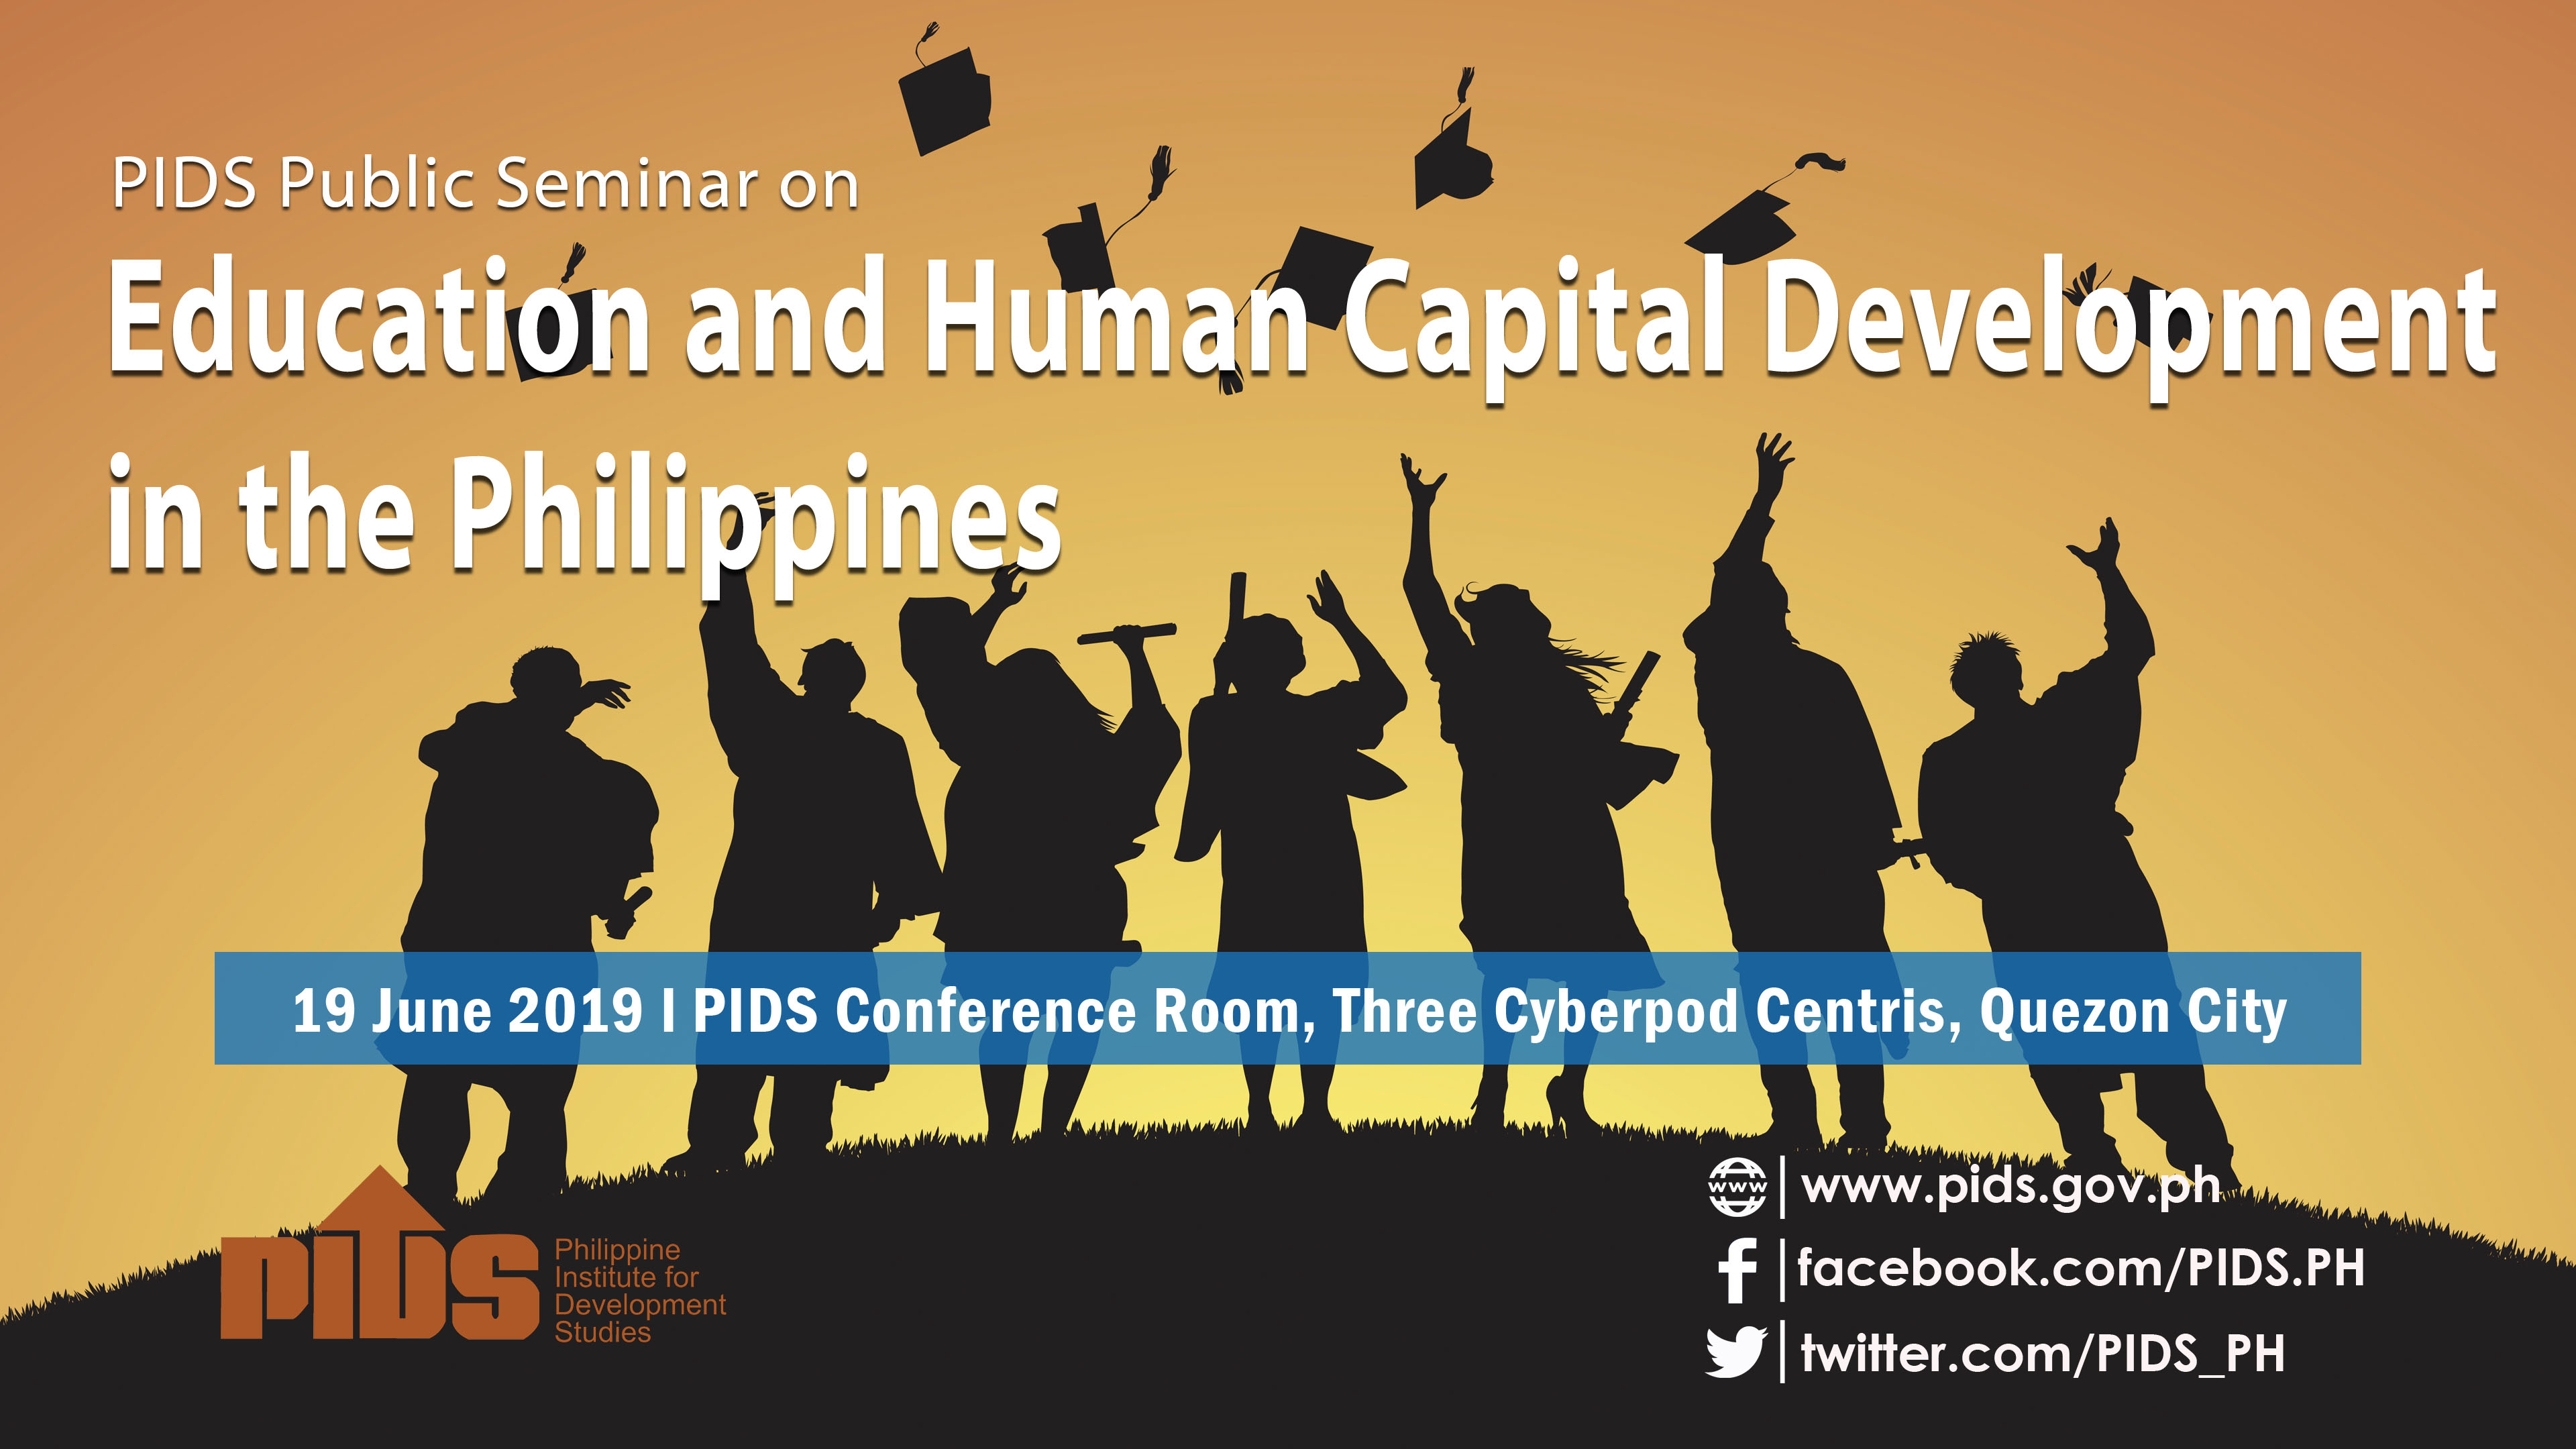 Public Seminar on Education and Human Capital Development in the Philippines-backdrop-june19.jpg